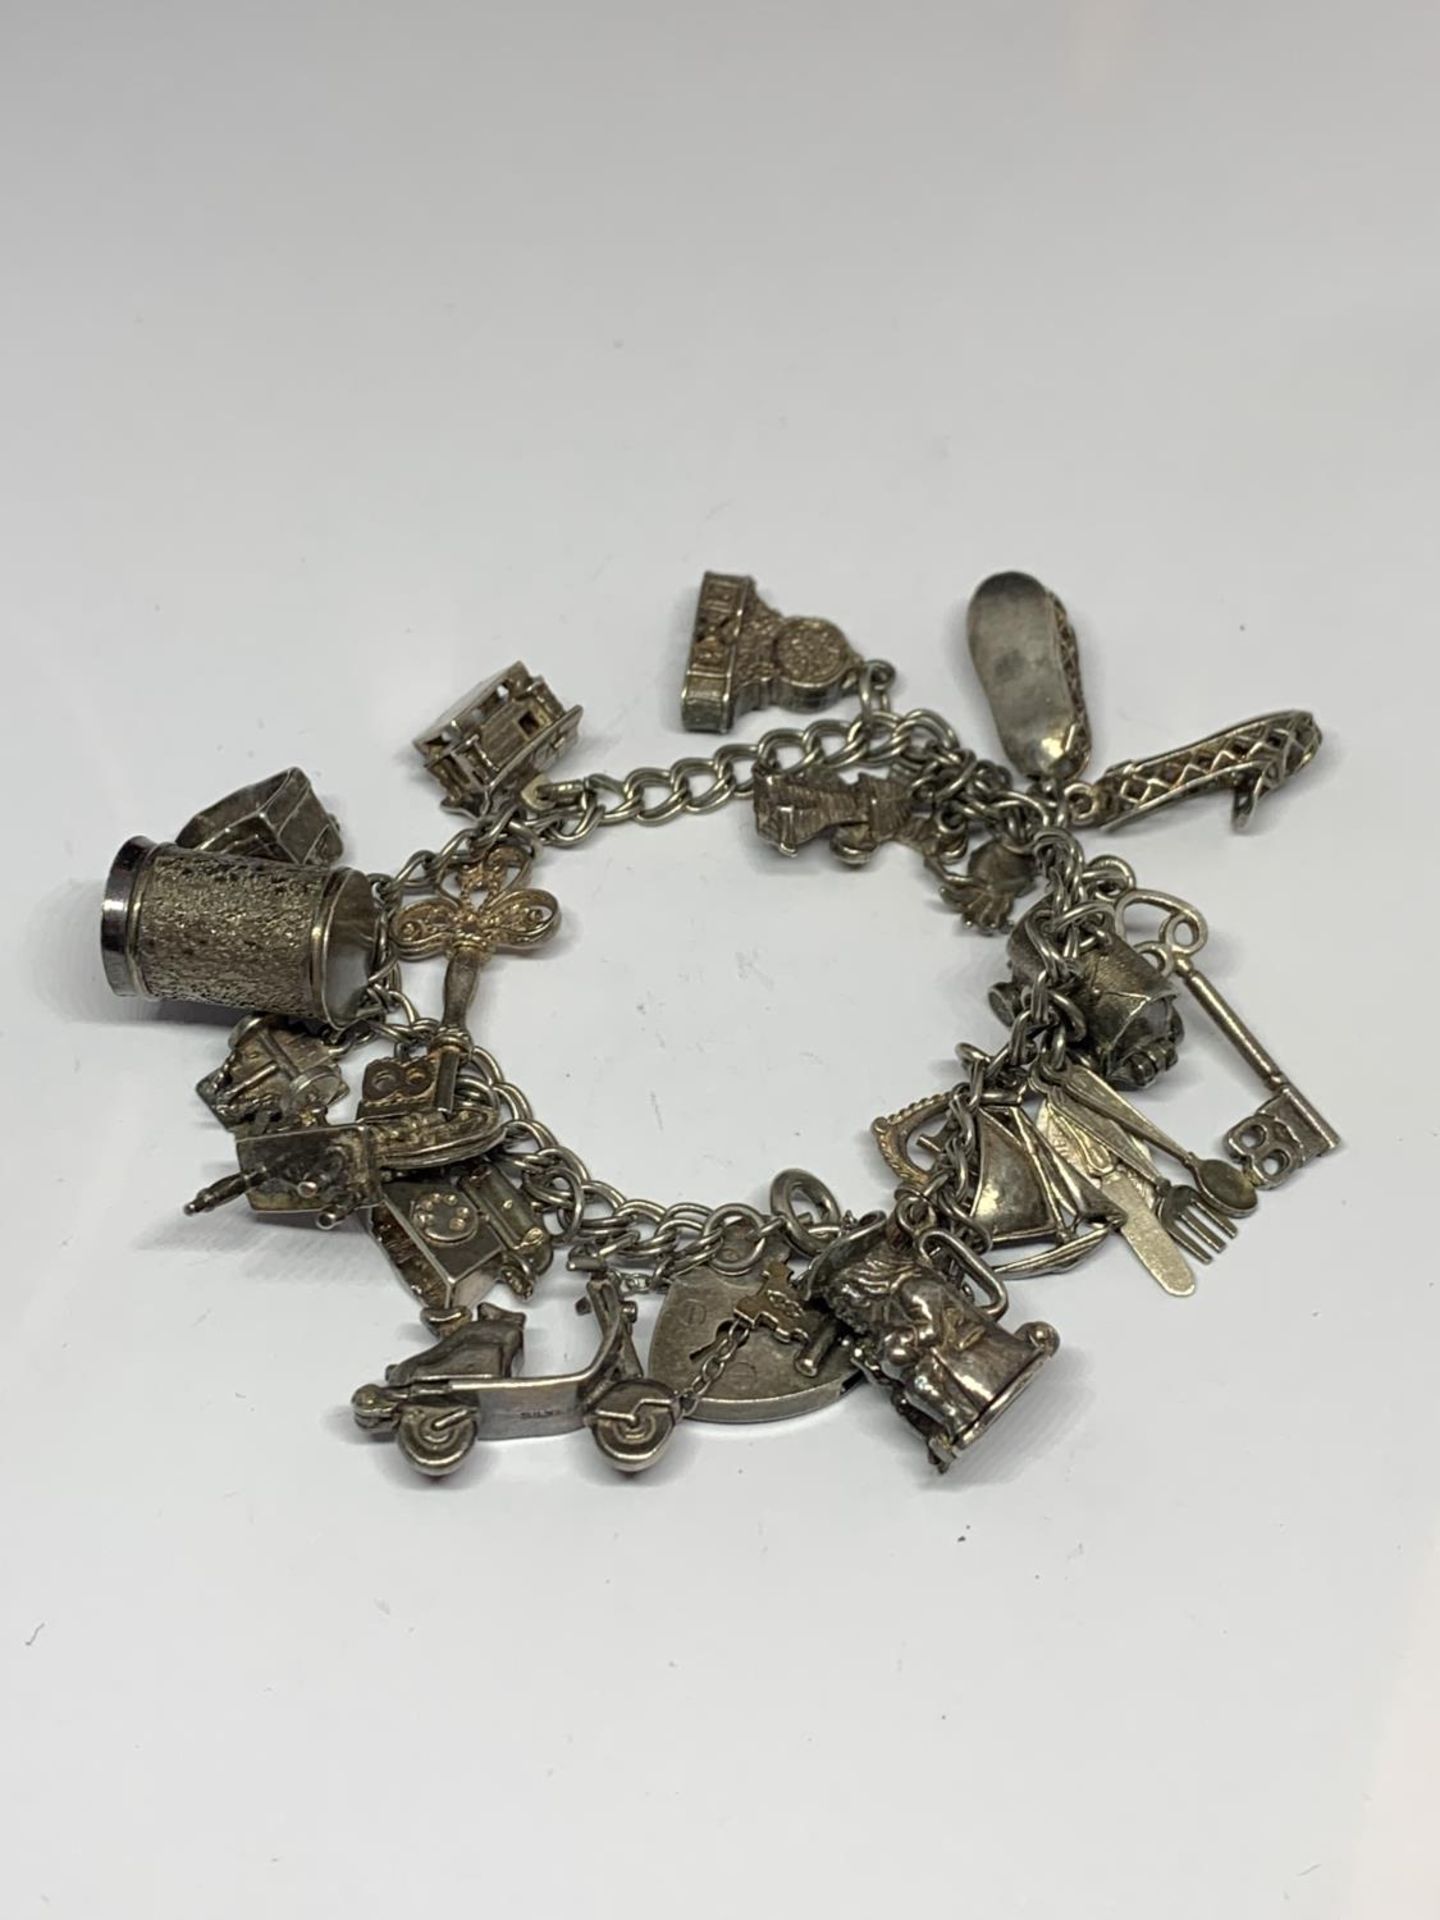 A SILVER CHARM BRACELET WITH EIGHTEEN CHARMS - Image 5 of 6